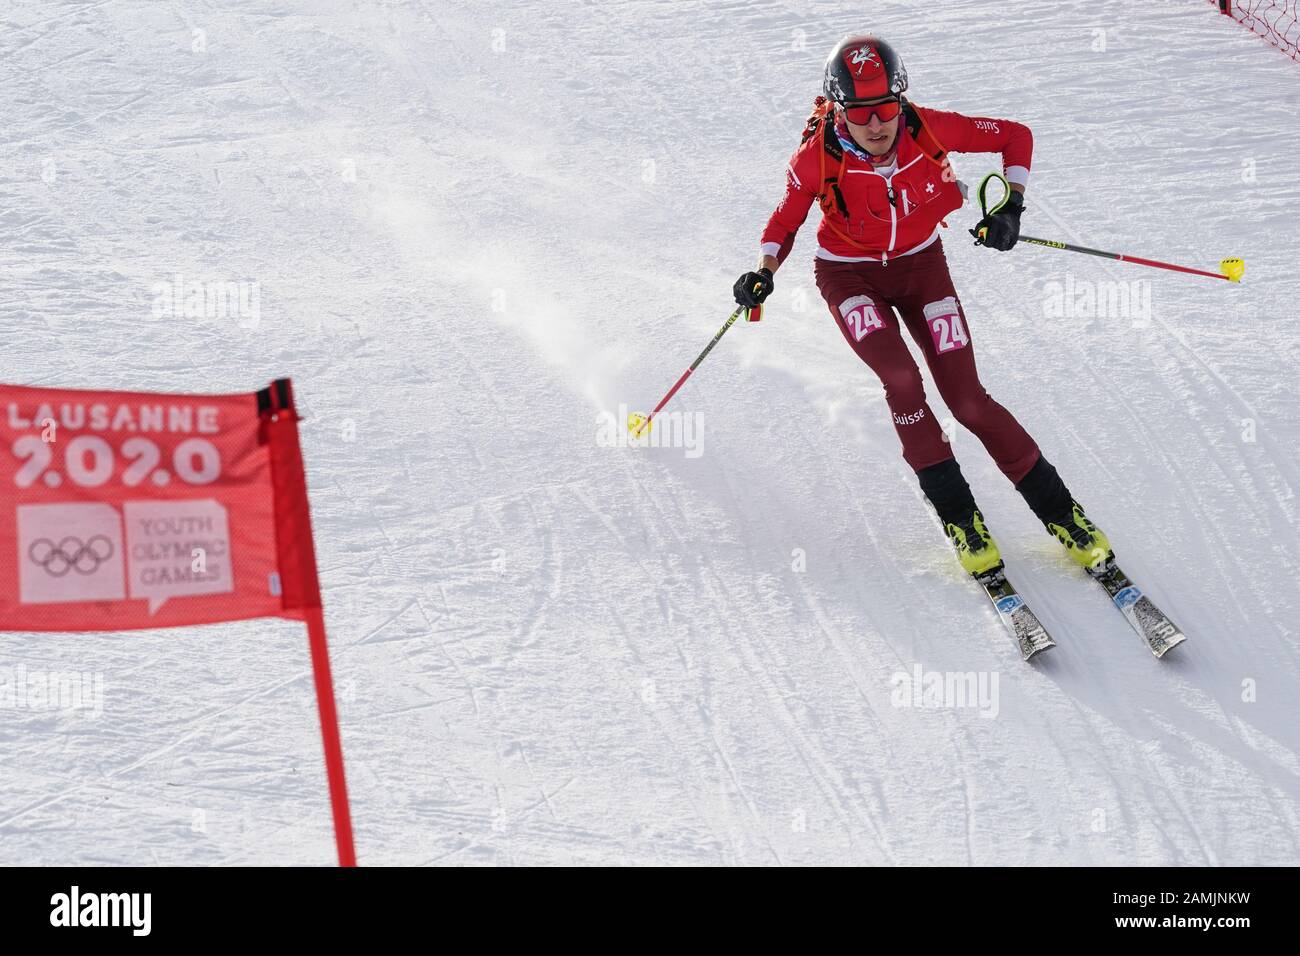 Villars. 13th Jan, 2020. Thomas Bussard of Switzerland competes during the men's sprint of ski mountaineering at the 3rd Winter Youth Olympic Games at Villars Winter Park in Villars, Switzerland on Jan. 13, 2020. Credit: Bai Xueqi/Xinhua/Alamy Live News Stock Photo